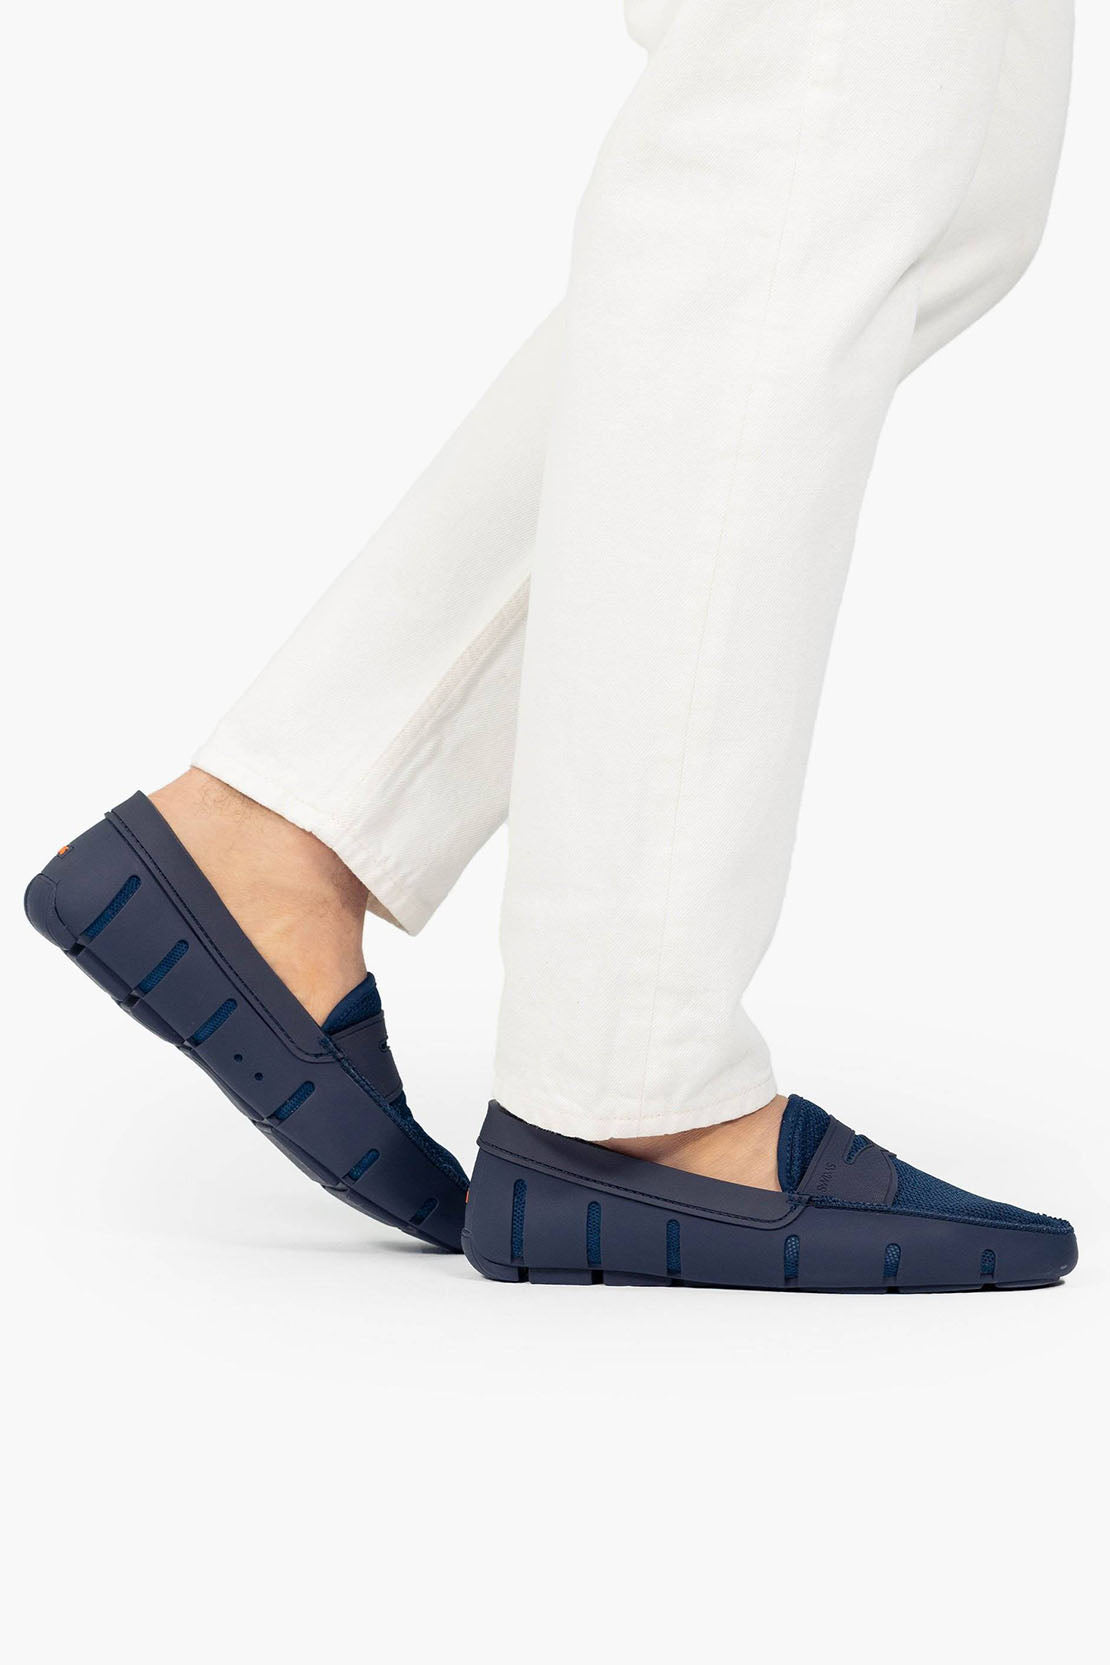 SWIMS - PENNY LOAFER in Navy 21201-002A